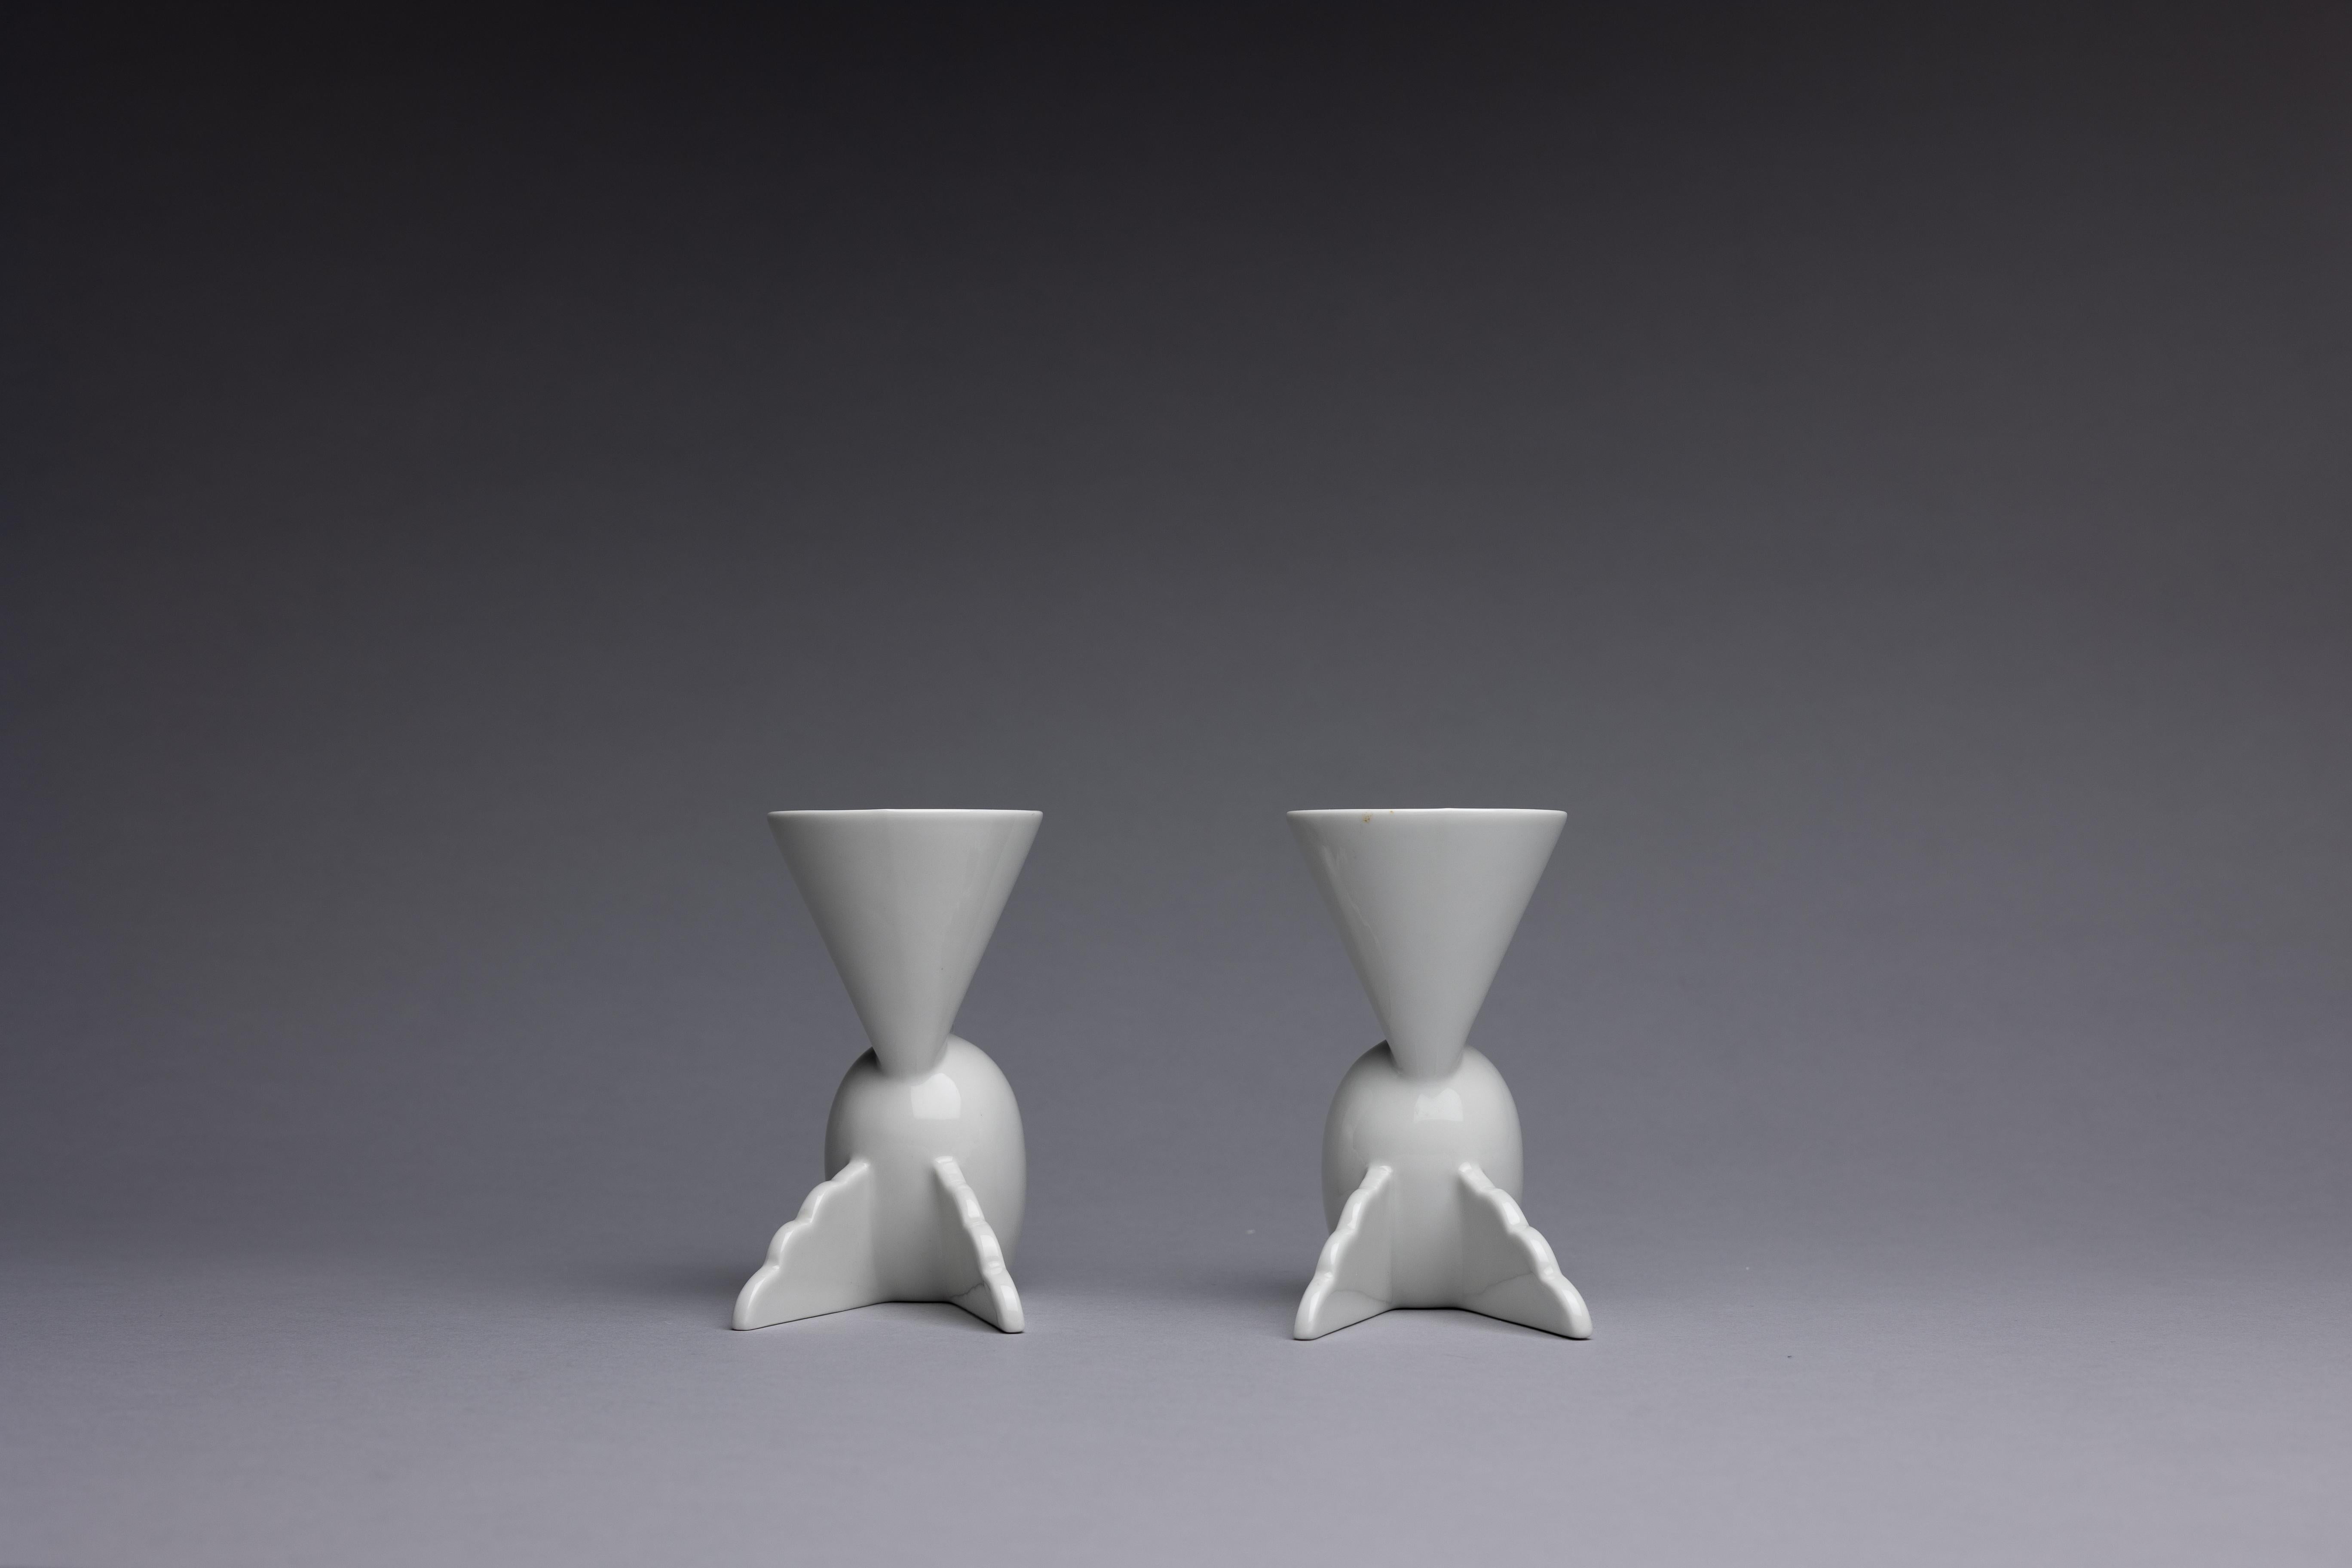 A pair of white porcelain 'Onega' cocktail cups, designed by Matteo Thun in 1982 for the Memphis group.

Memphis Milano formed in the 1980s as a response to the rather formulaic design principles of the Mid-Century Modern style. The group’s